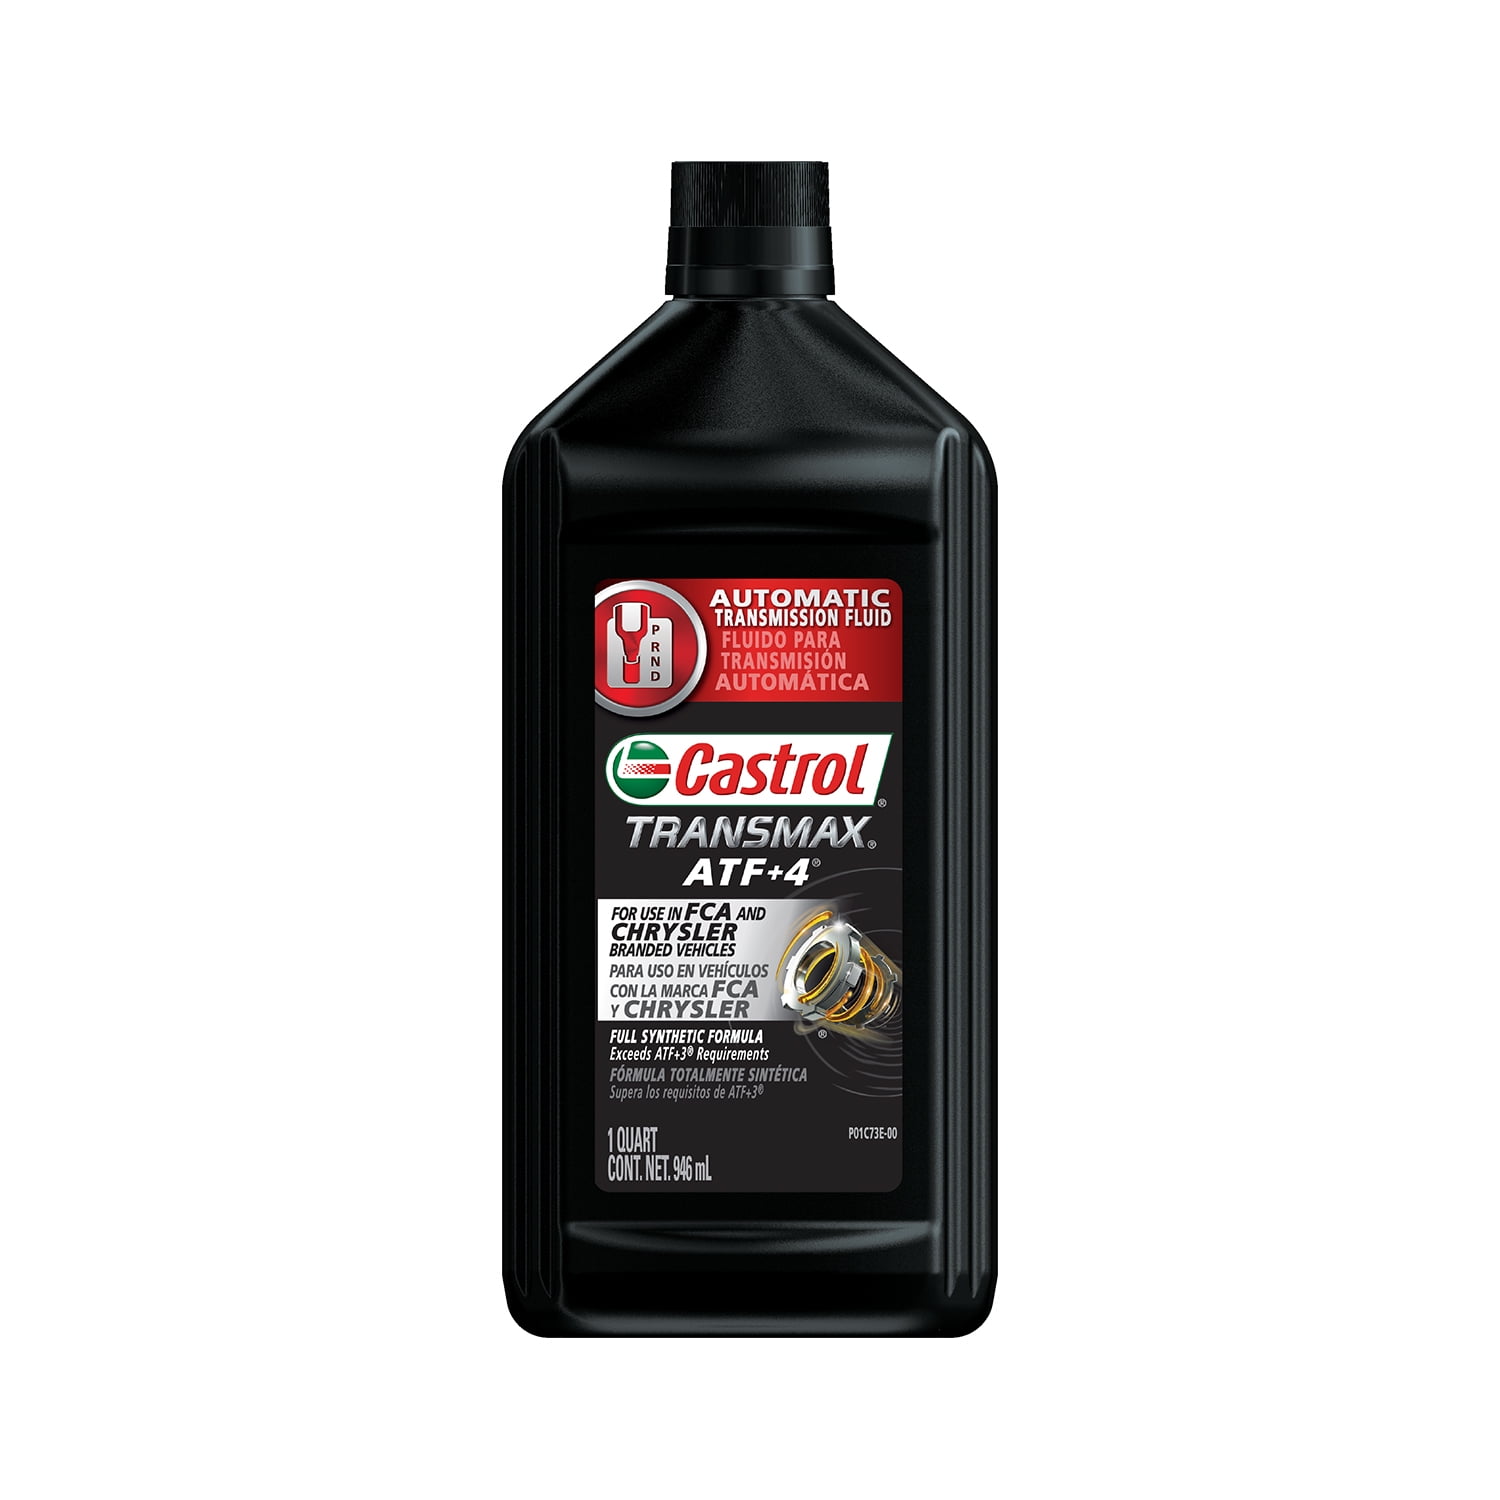  Mobil 1 Full Synthetic LV Automatic Transmission Fluid HP,  6-Pack of 1 quarts : Automotive